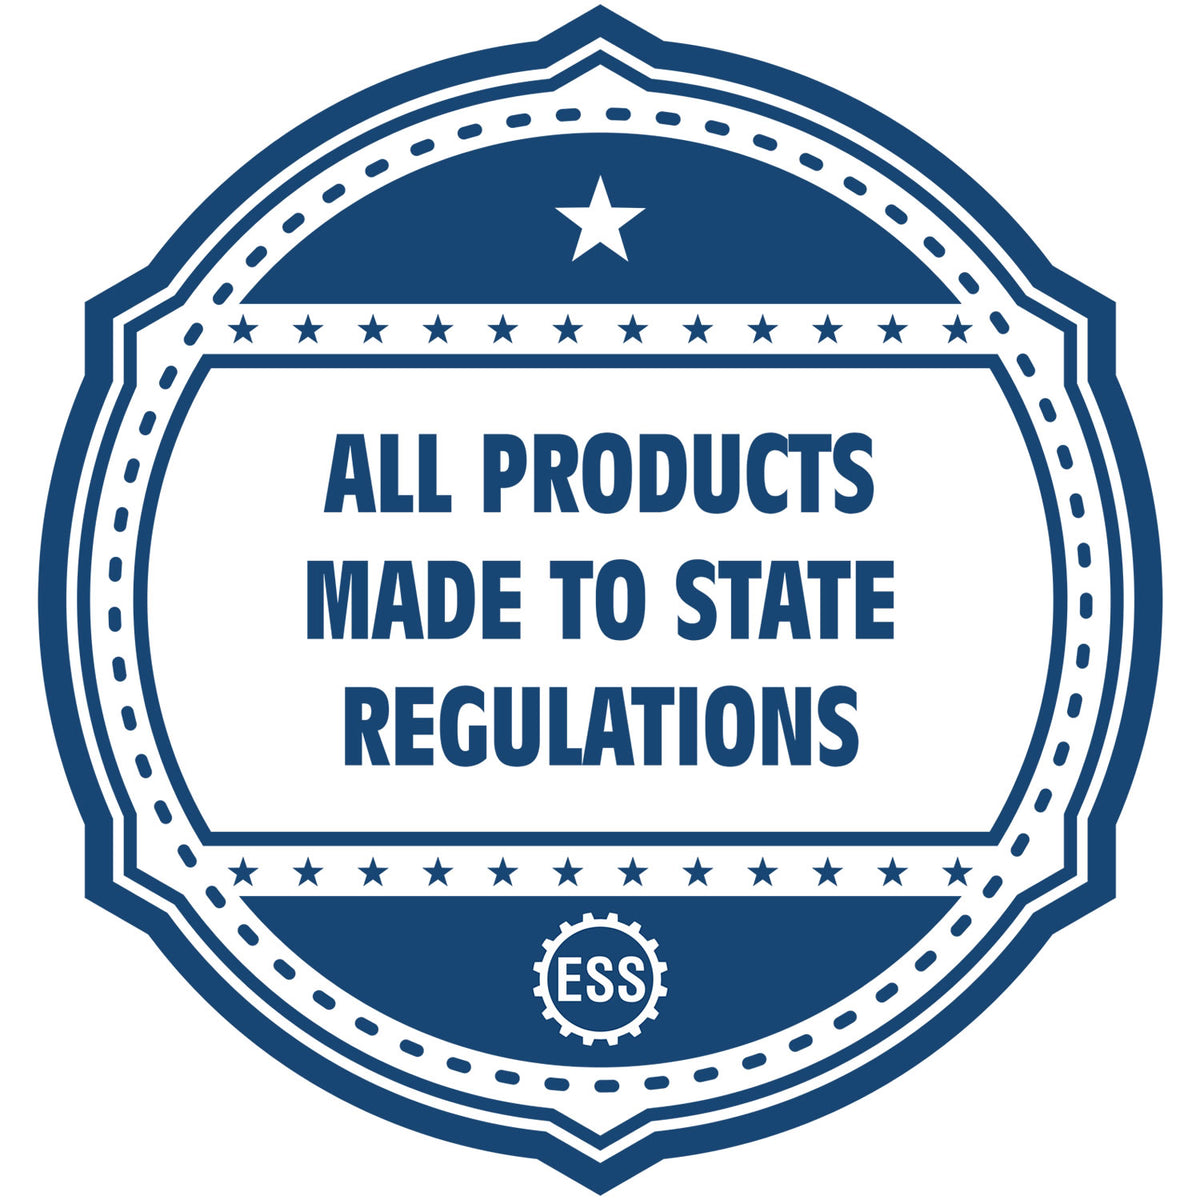 An icon or badge element for the Handheld Massachusetts Land Surveyor Seal showing that this product is made in compliance with state regulations.